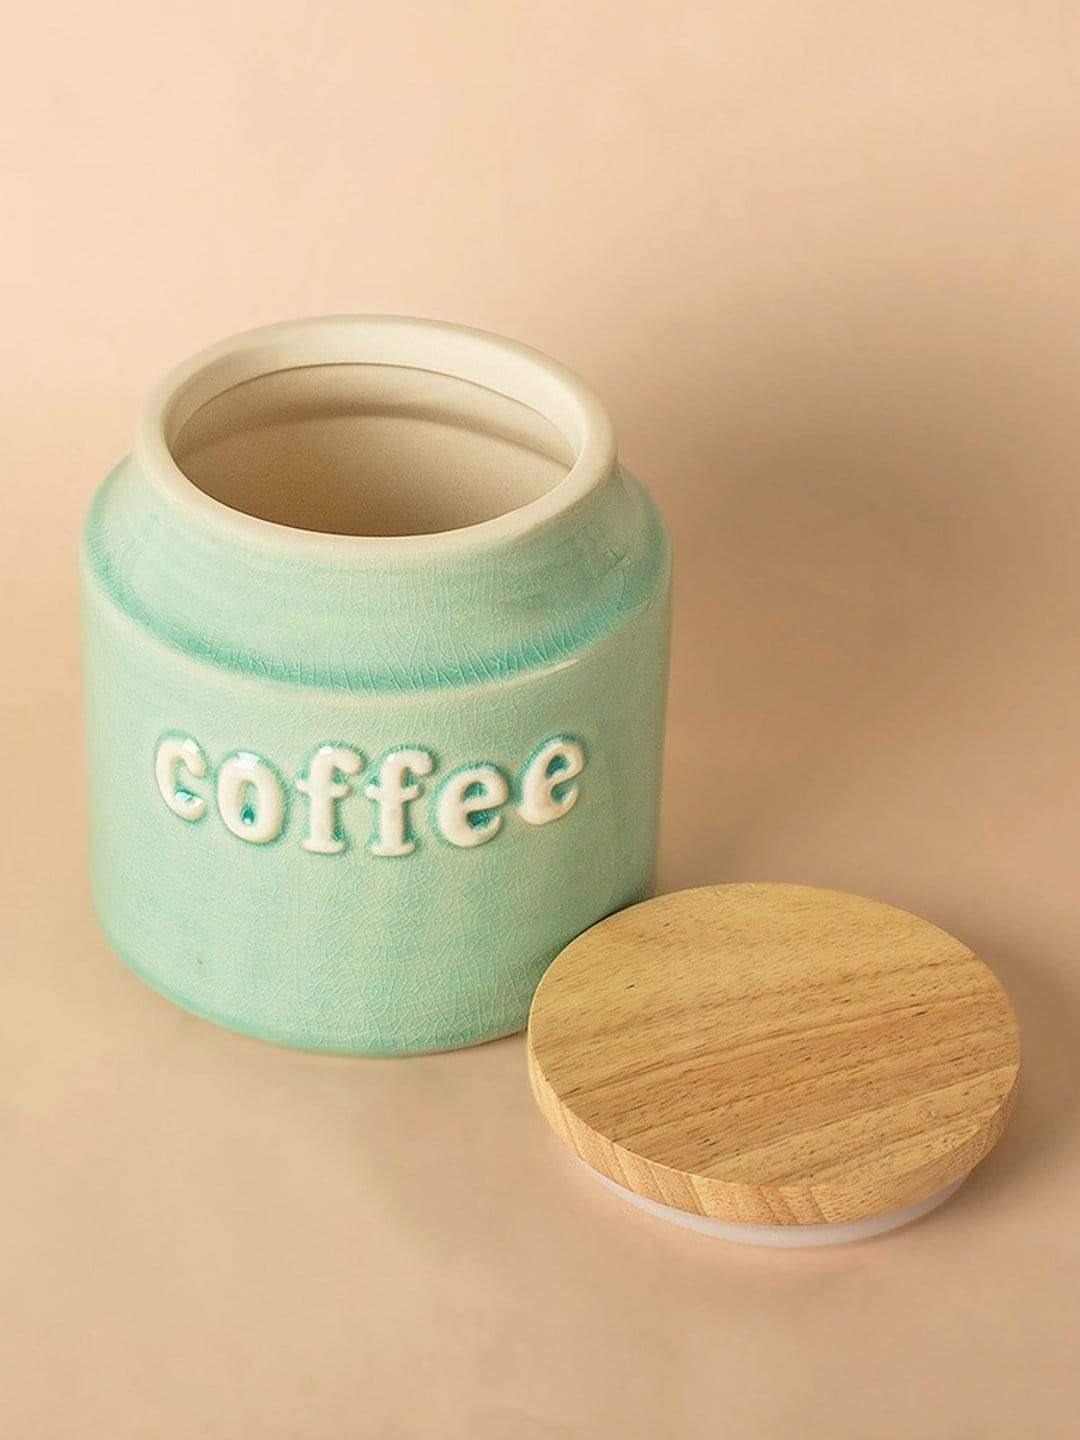 Coffee Canister - The Wishing Chair